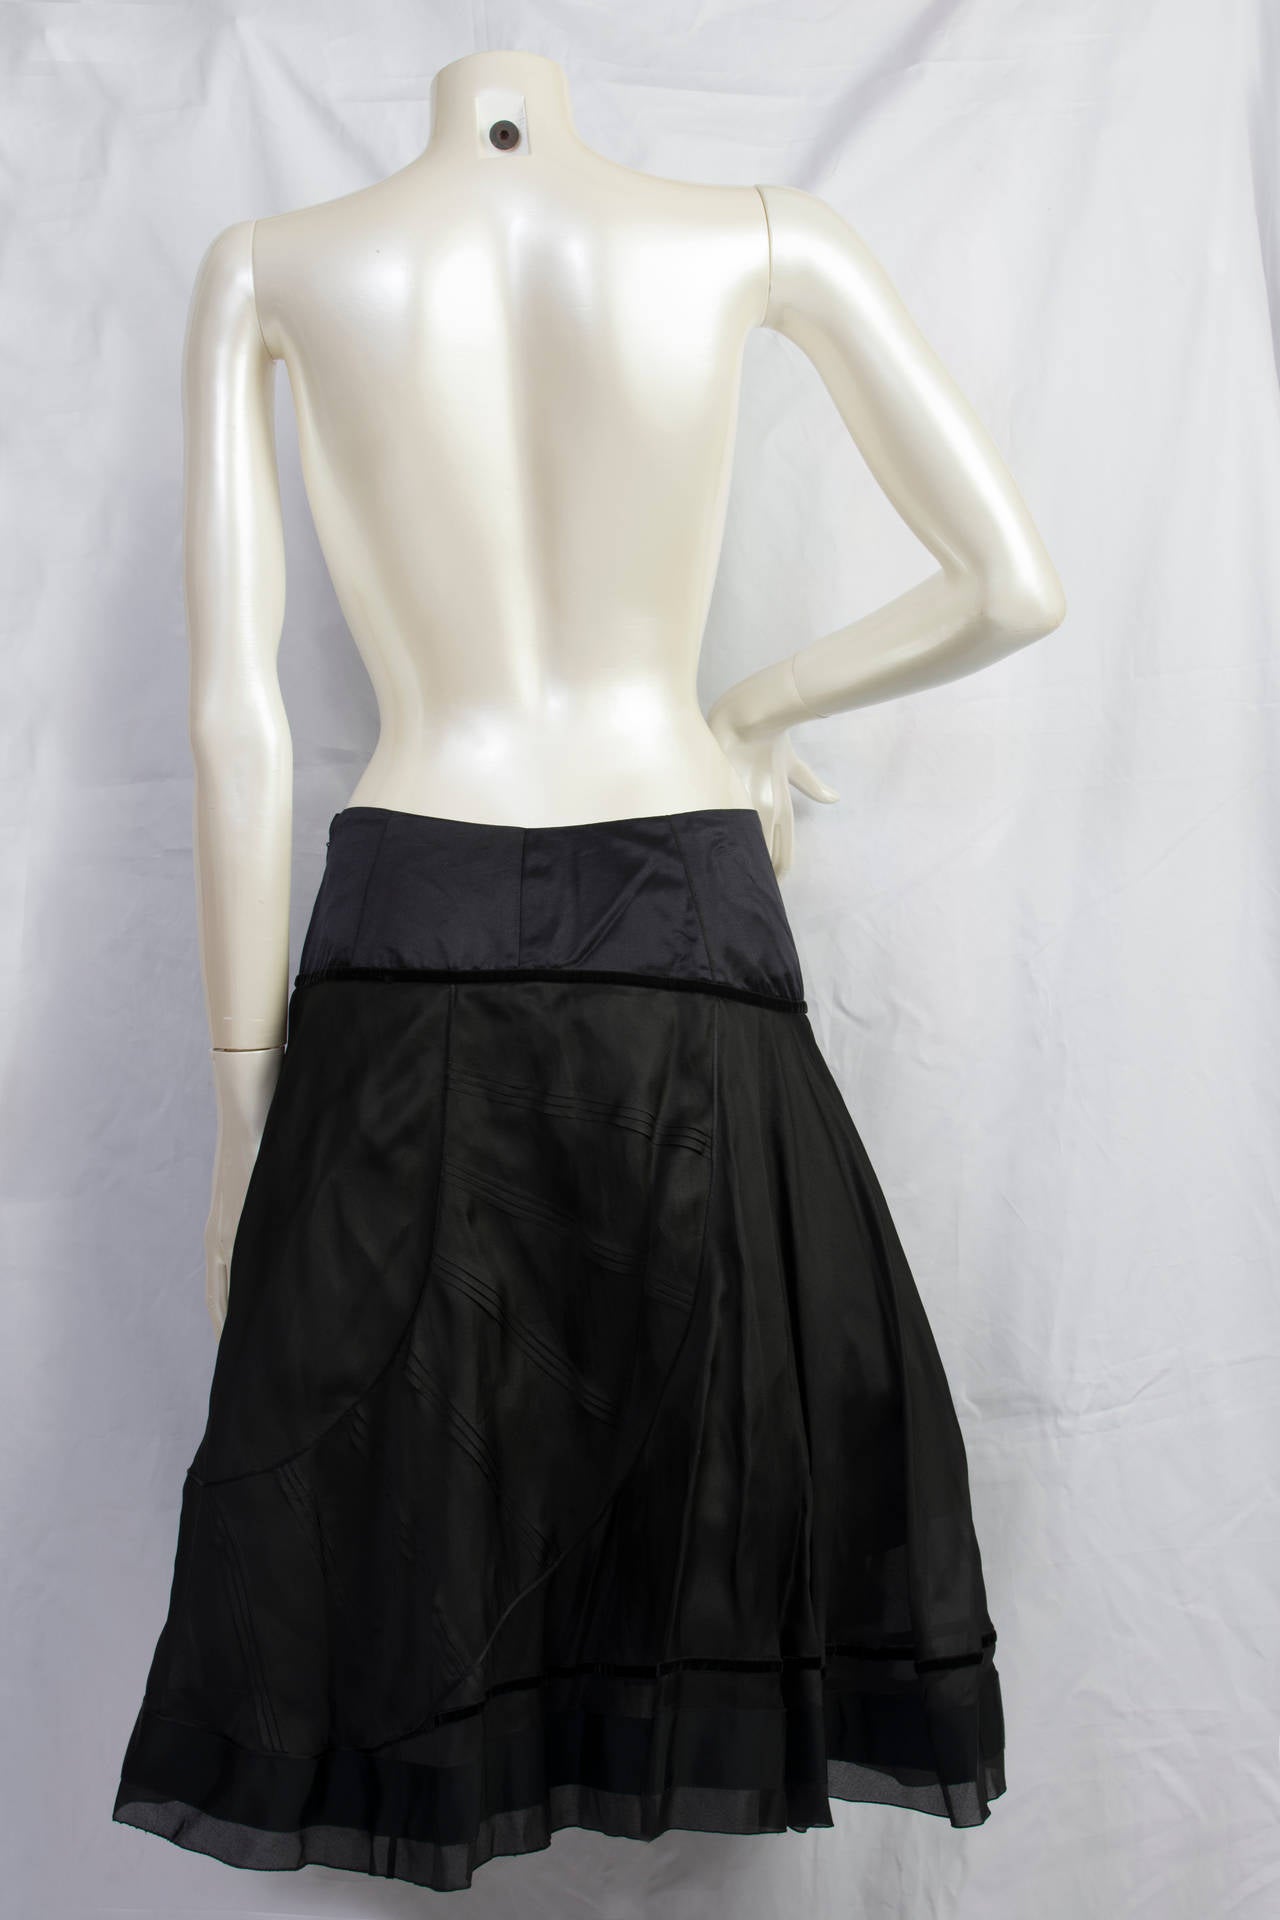 Celine black vintage skirt made in france 100% Silk.
The skirt is black in a 40 french size which is a 44 italian size.
Composition: 100% silk, lining 100% silk
Size: life line 80 cm, lenght 68 cm in italian size range